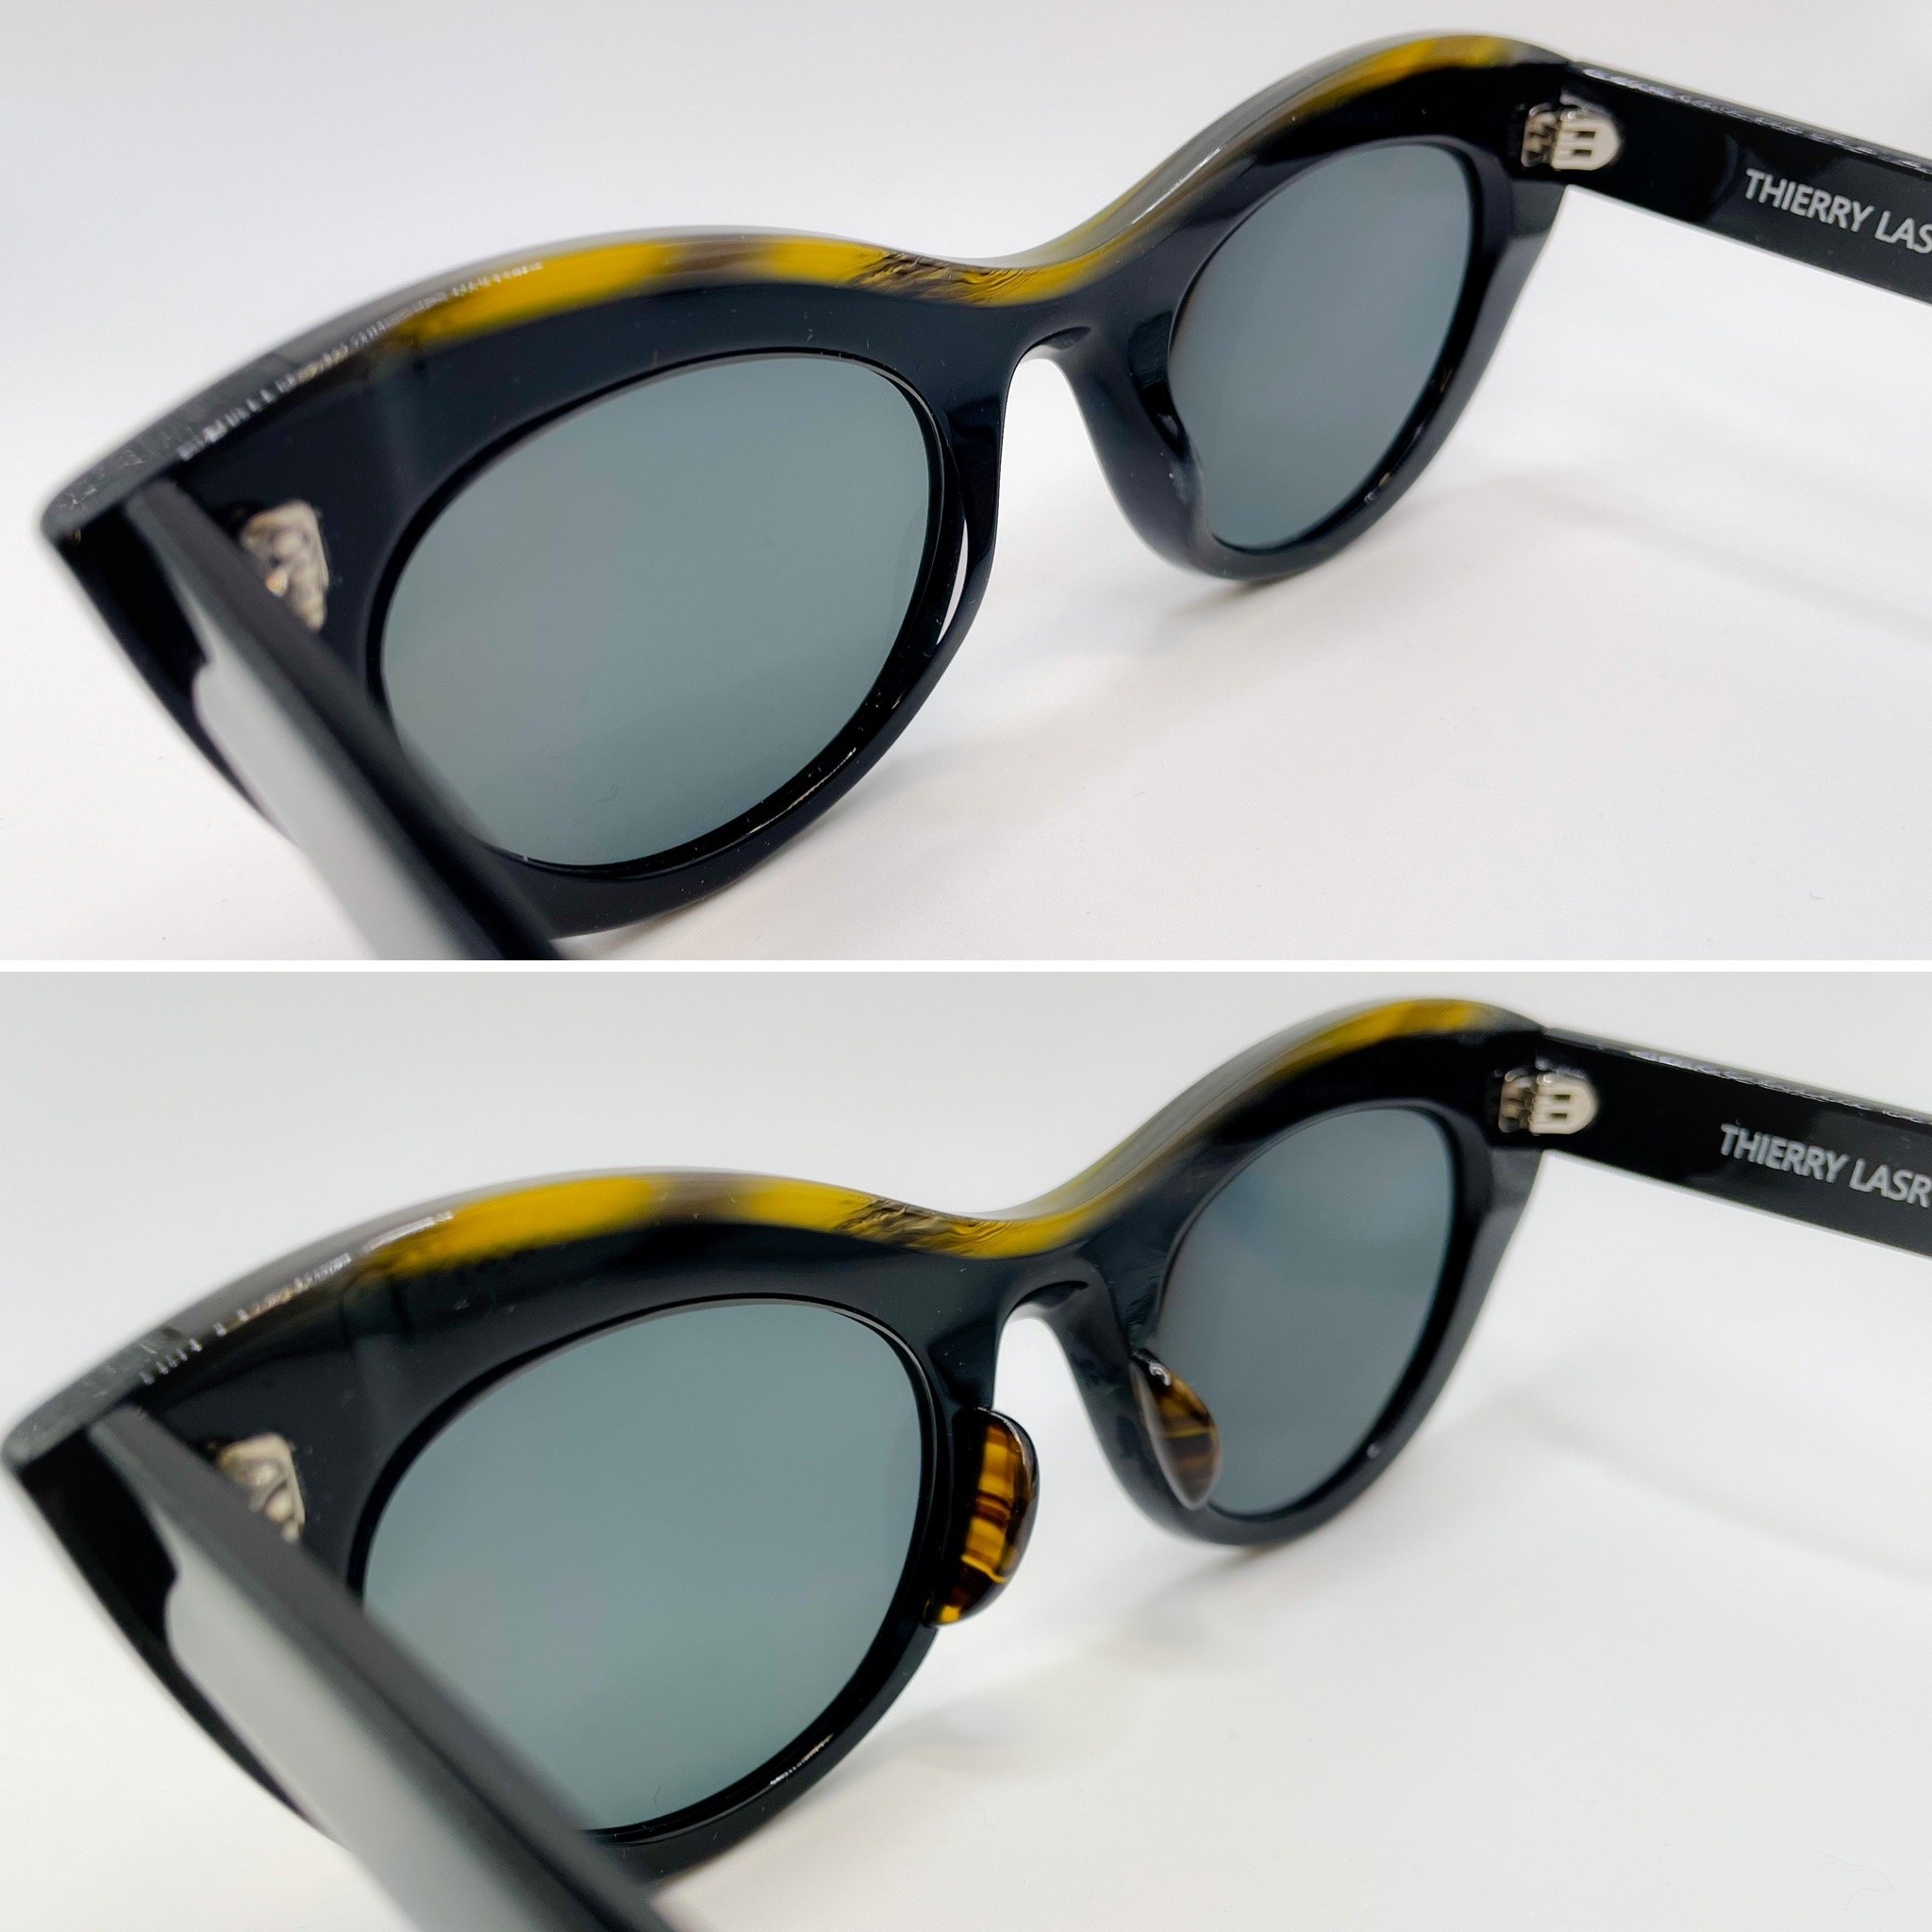 large acetate build up, L.E. brown/black striated - Thierry Lasry